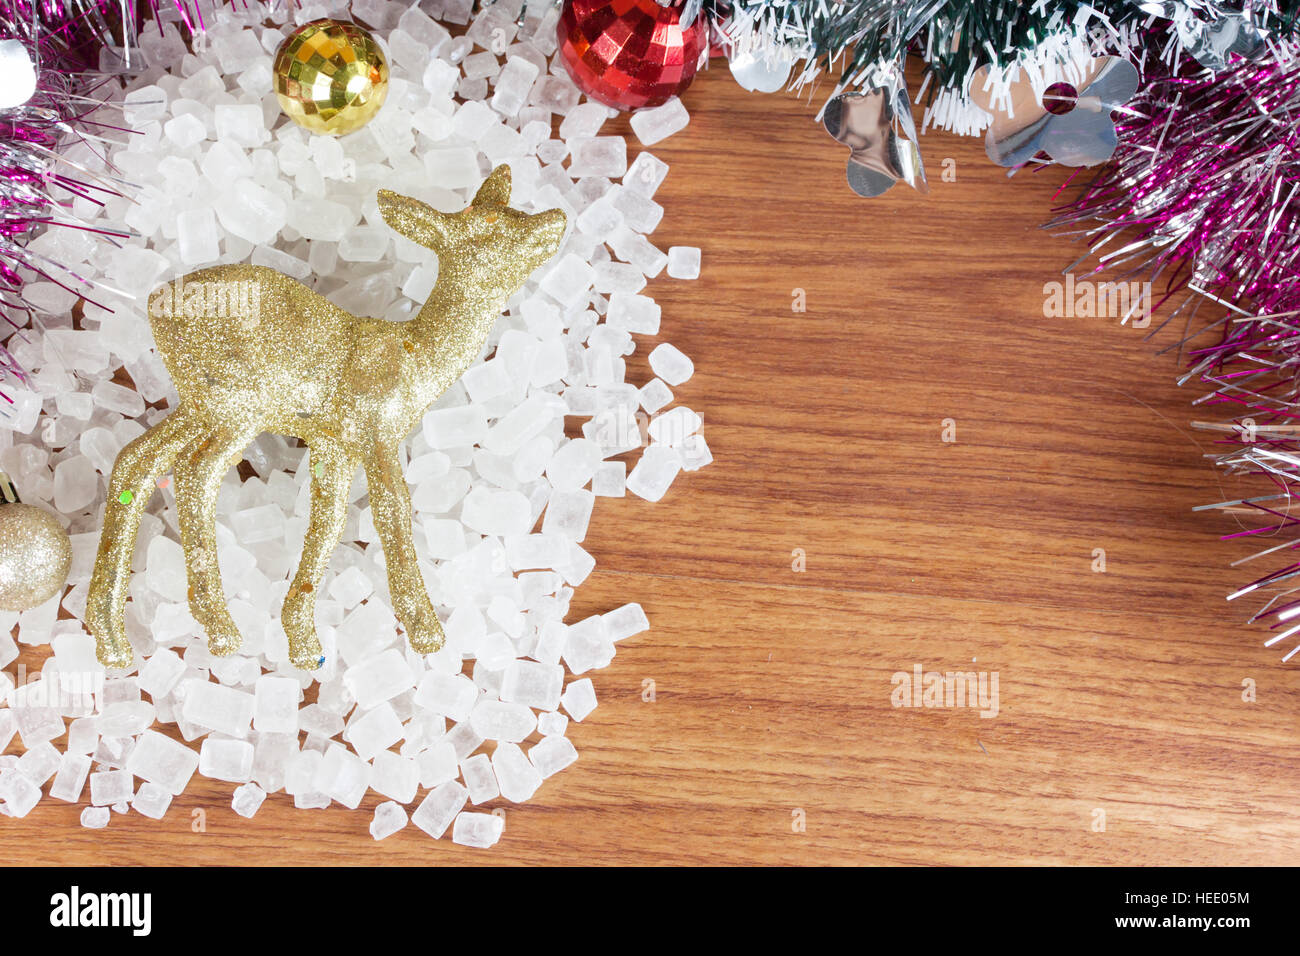 Deer color gold on a pile of white crystalline. Red and yellow Christmas Balls Ornaments on wood, Stock Photo